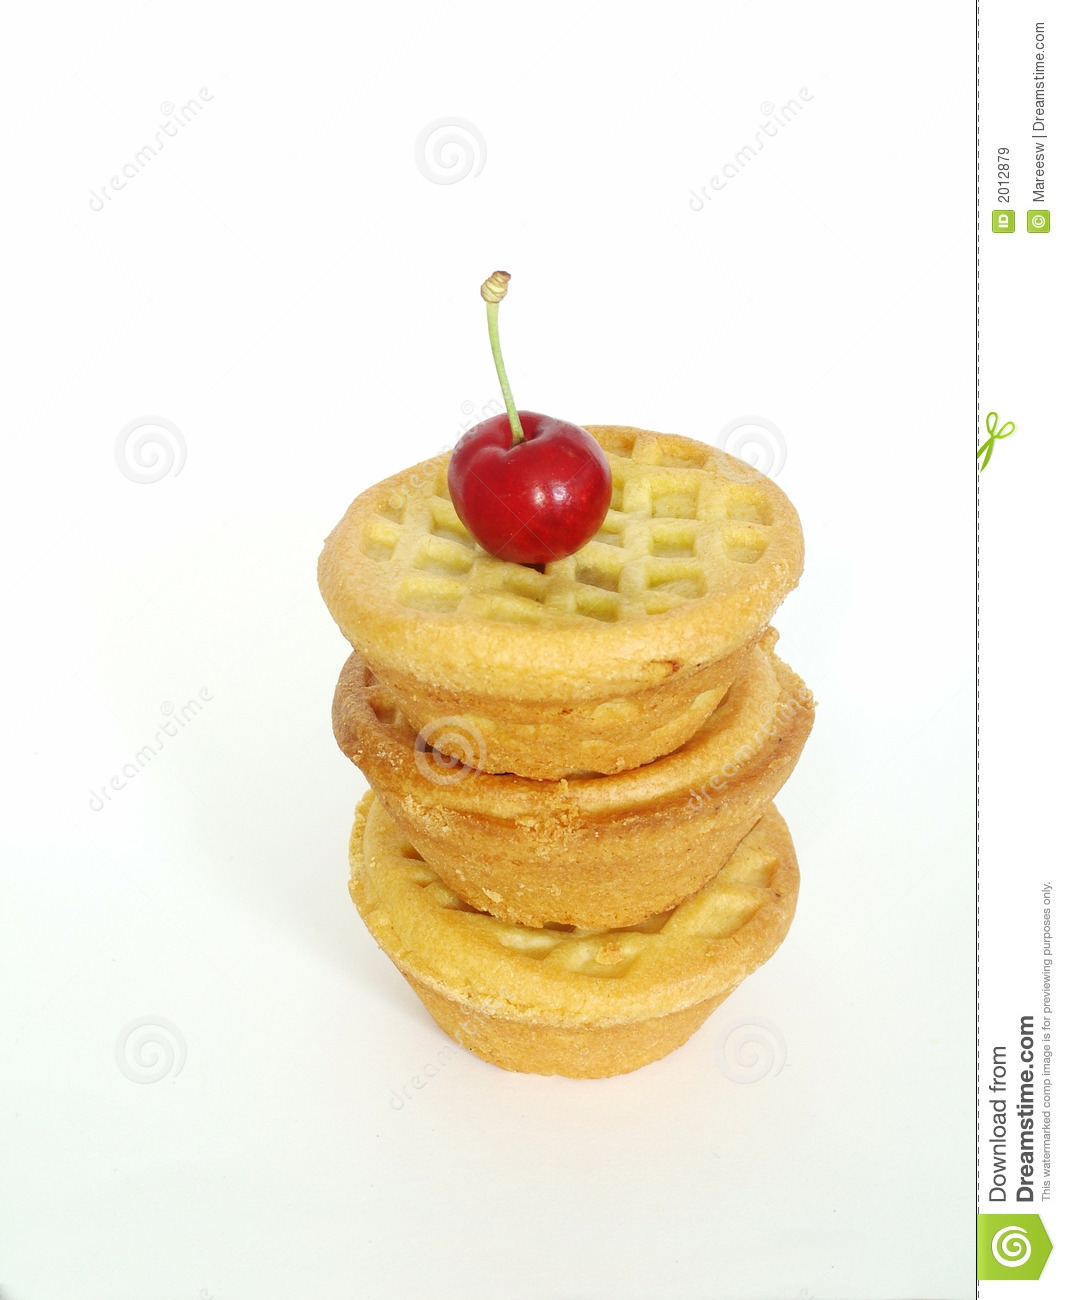 Fruit Mince Pies Royalty Free Stock Images   Image  2012879